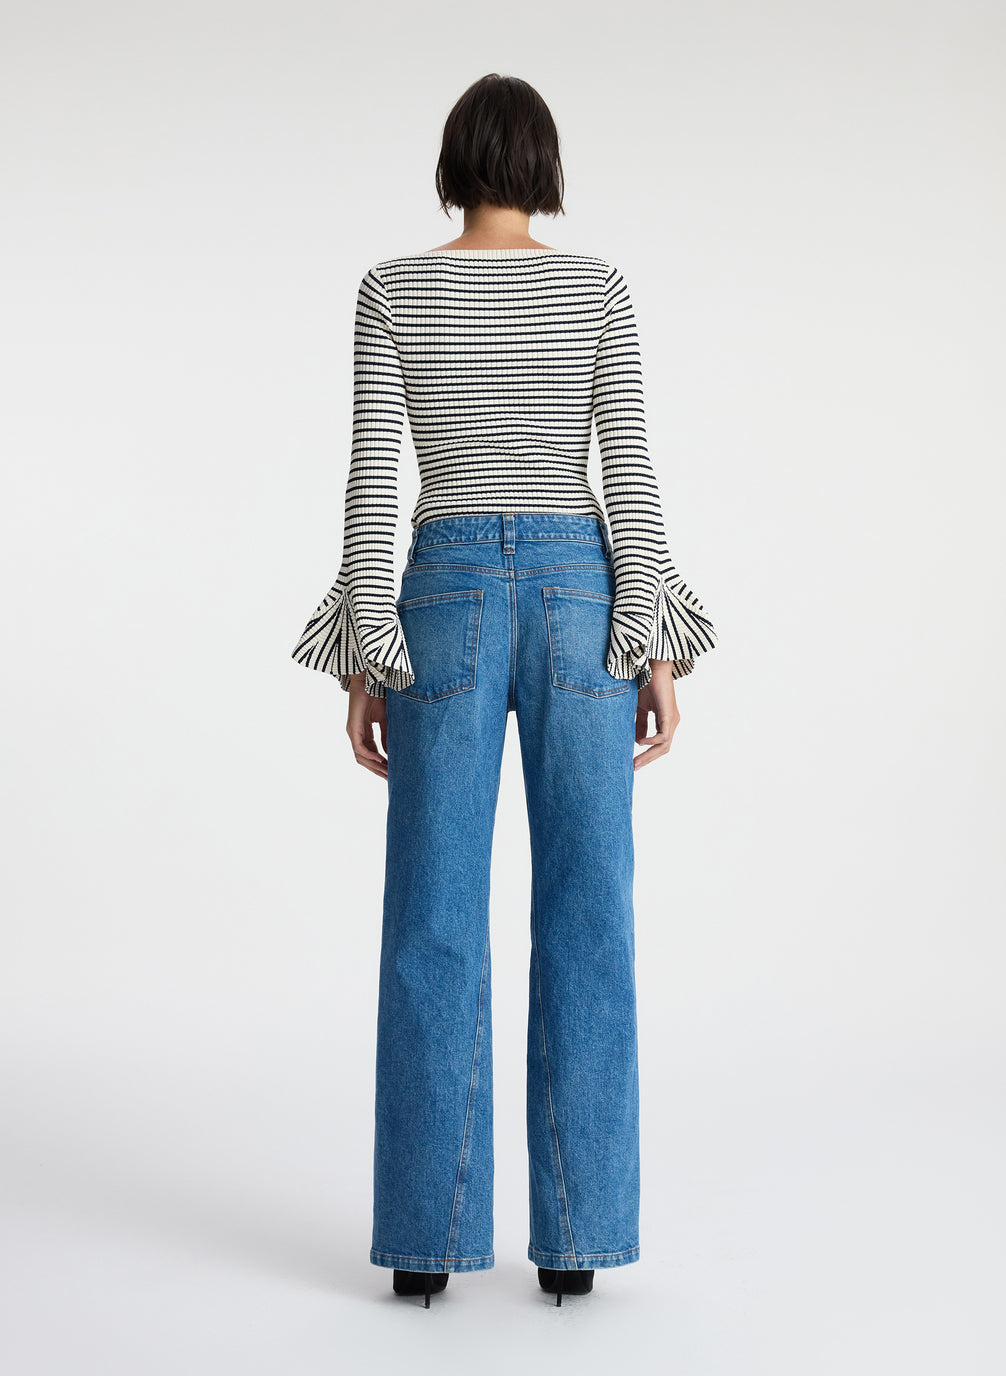 back view of woman wearing striped long bell sleeve knit top and medium blue wash denim jeans